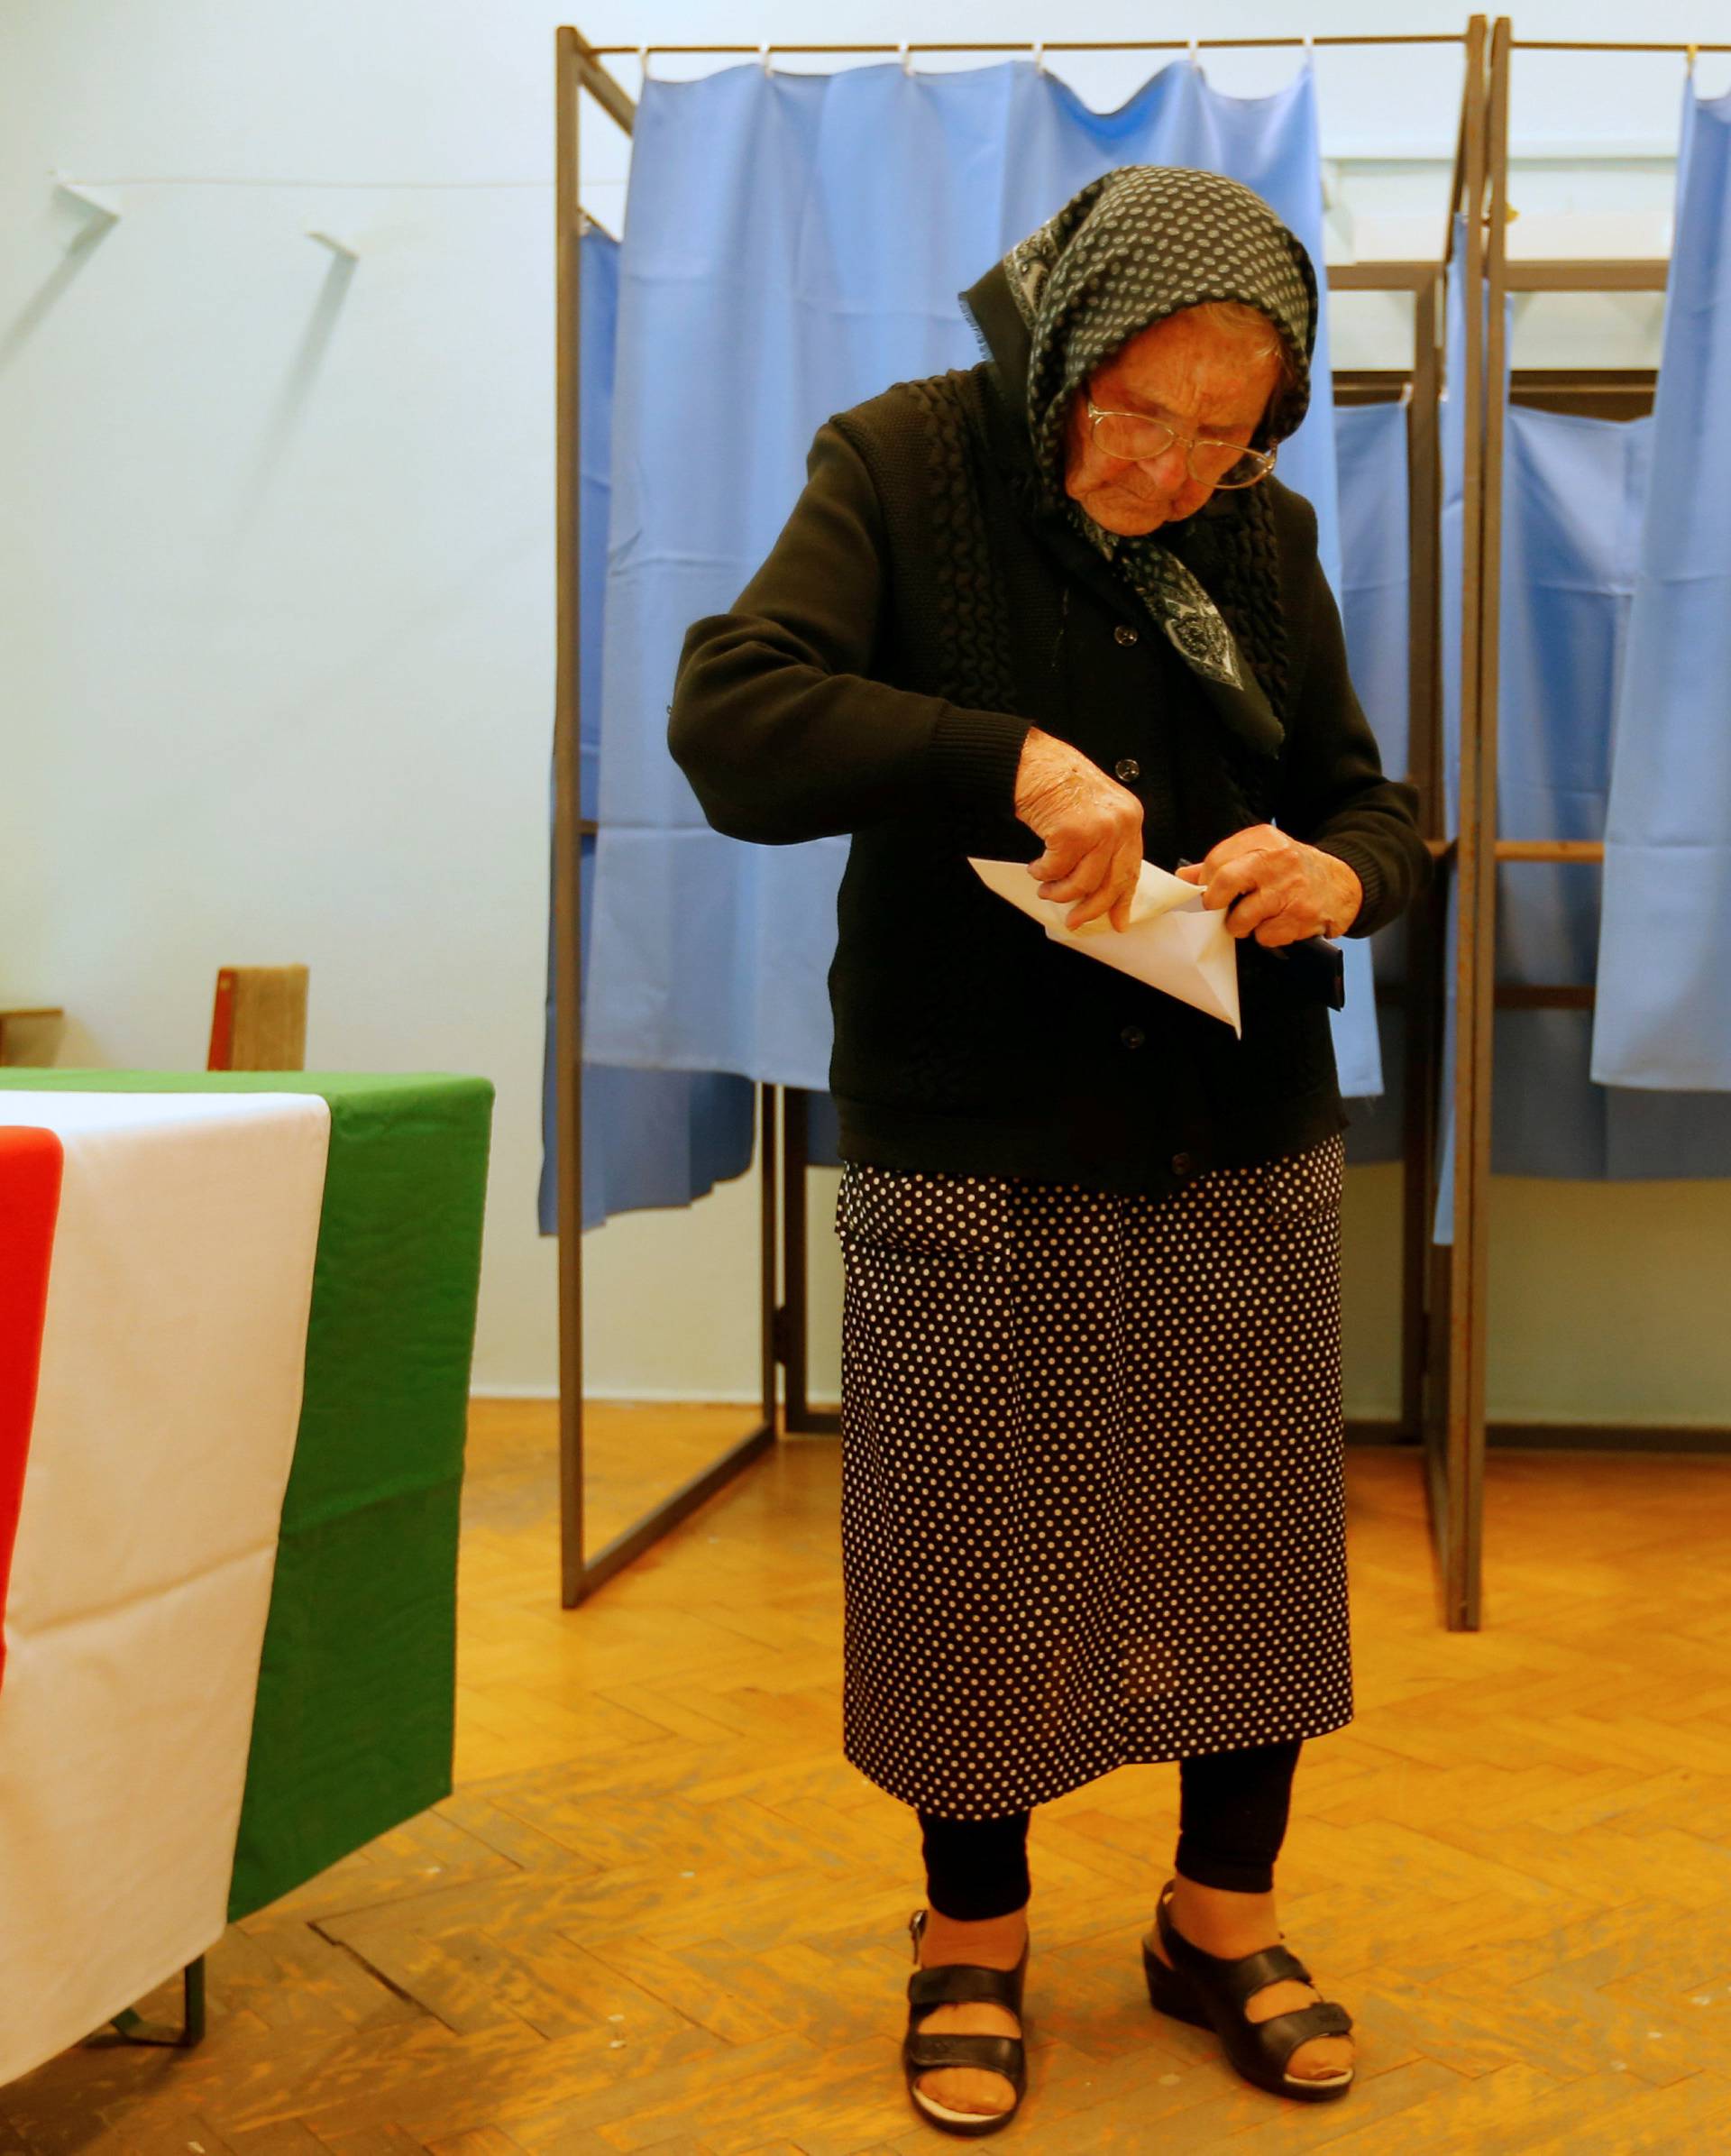 A Hungarian woman votes in a referendum on the European Union's migrant quotas in village of Roszke near the Serbian border